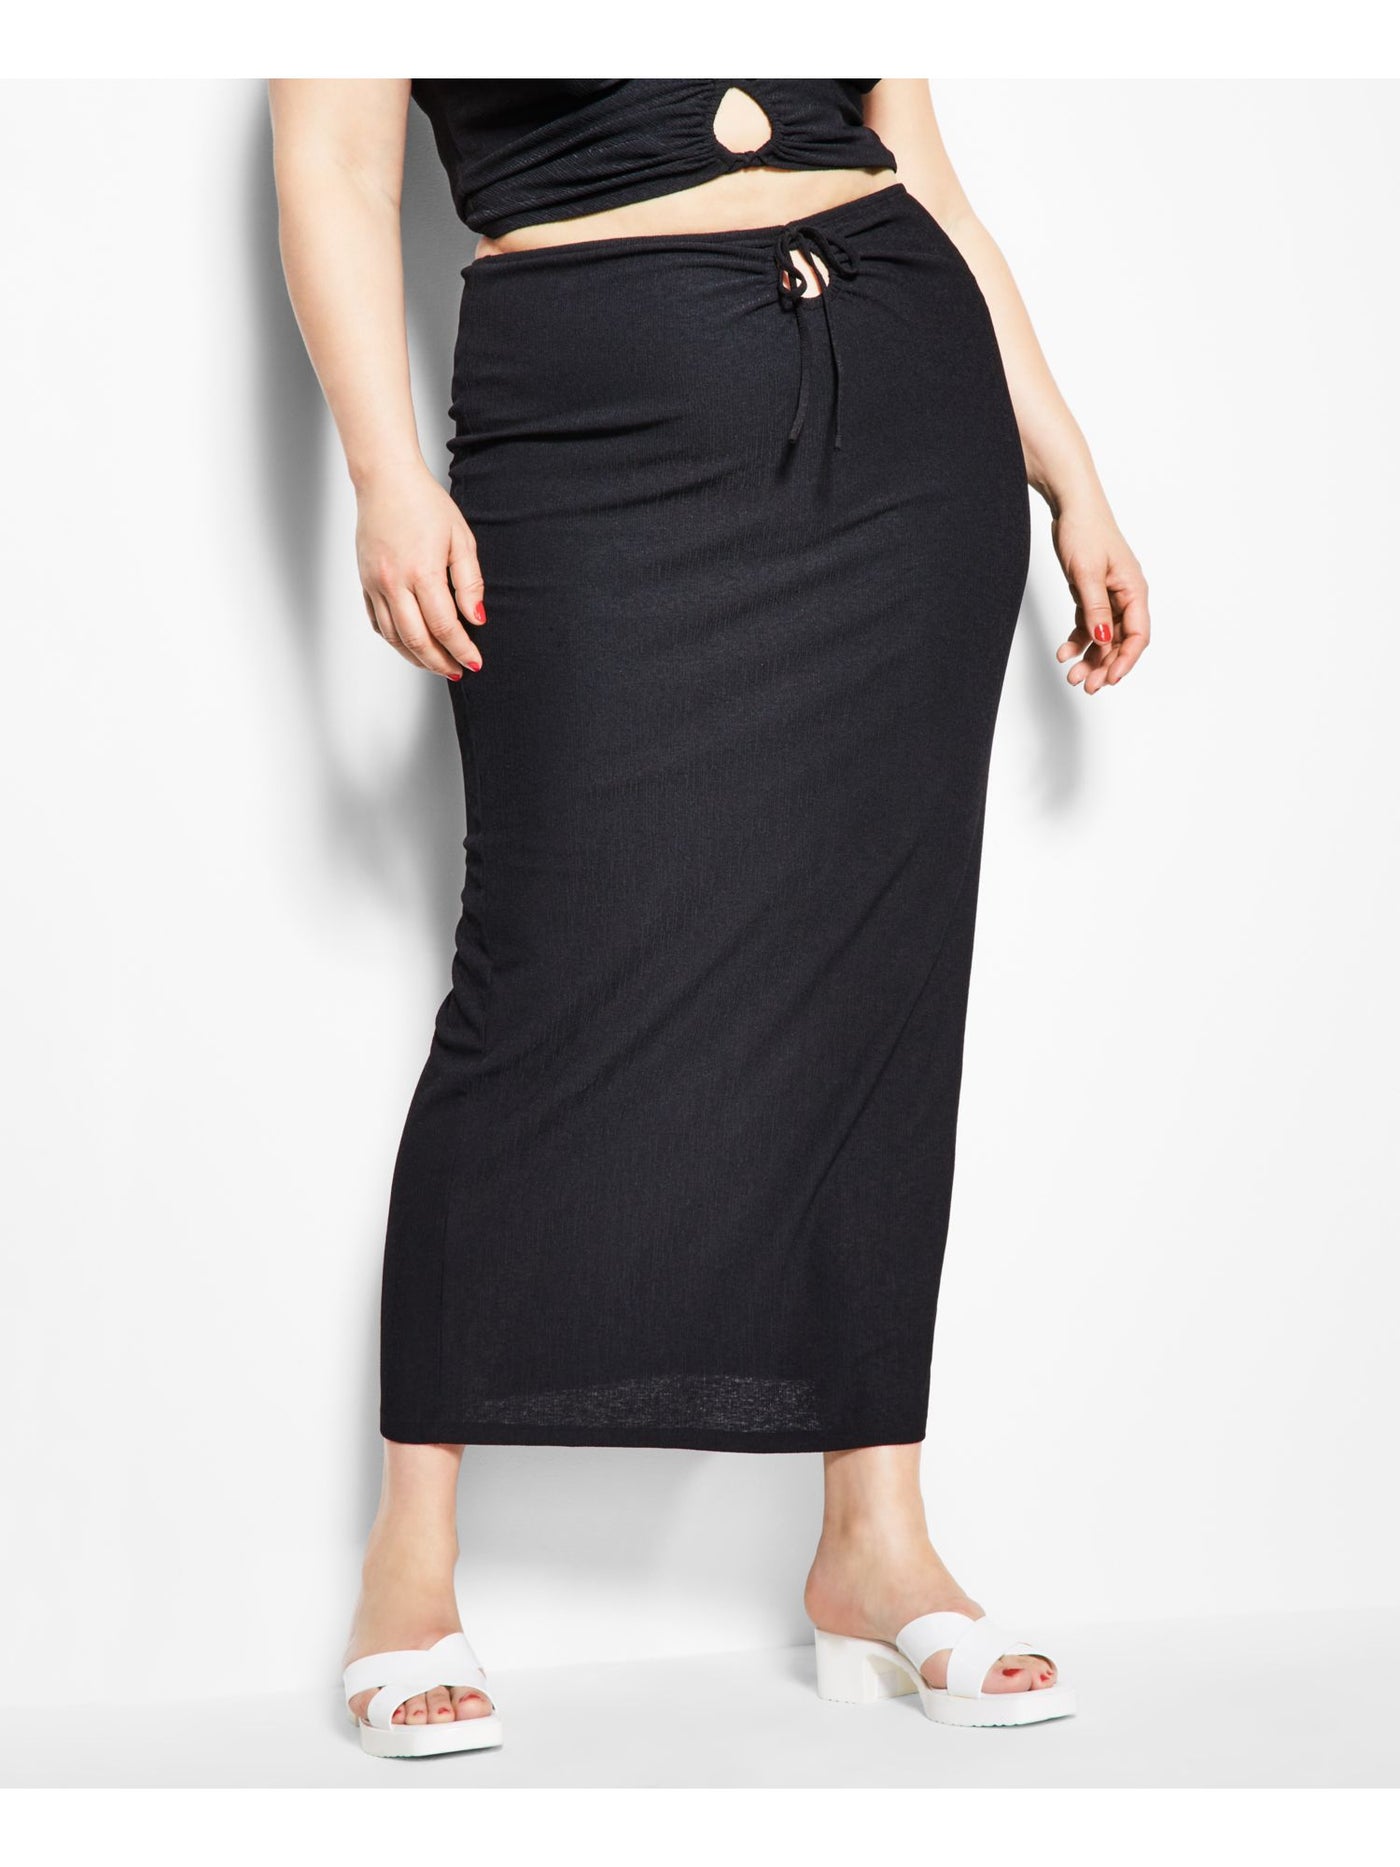 ROYALTY BY MALUMA Womens Black Ribbed Cut Out Pull-on Tie Detail Maxi Pencil Skirt XL